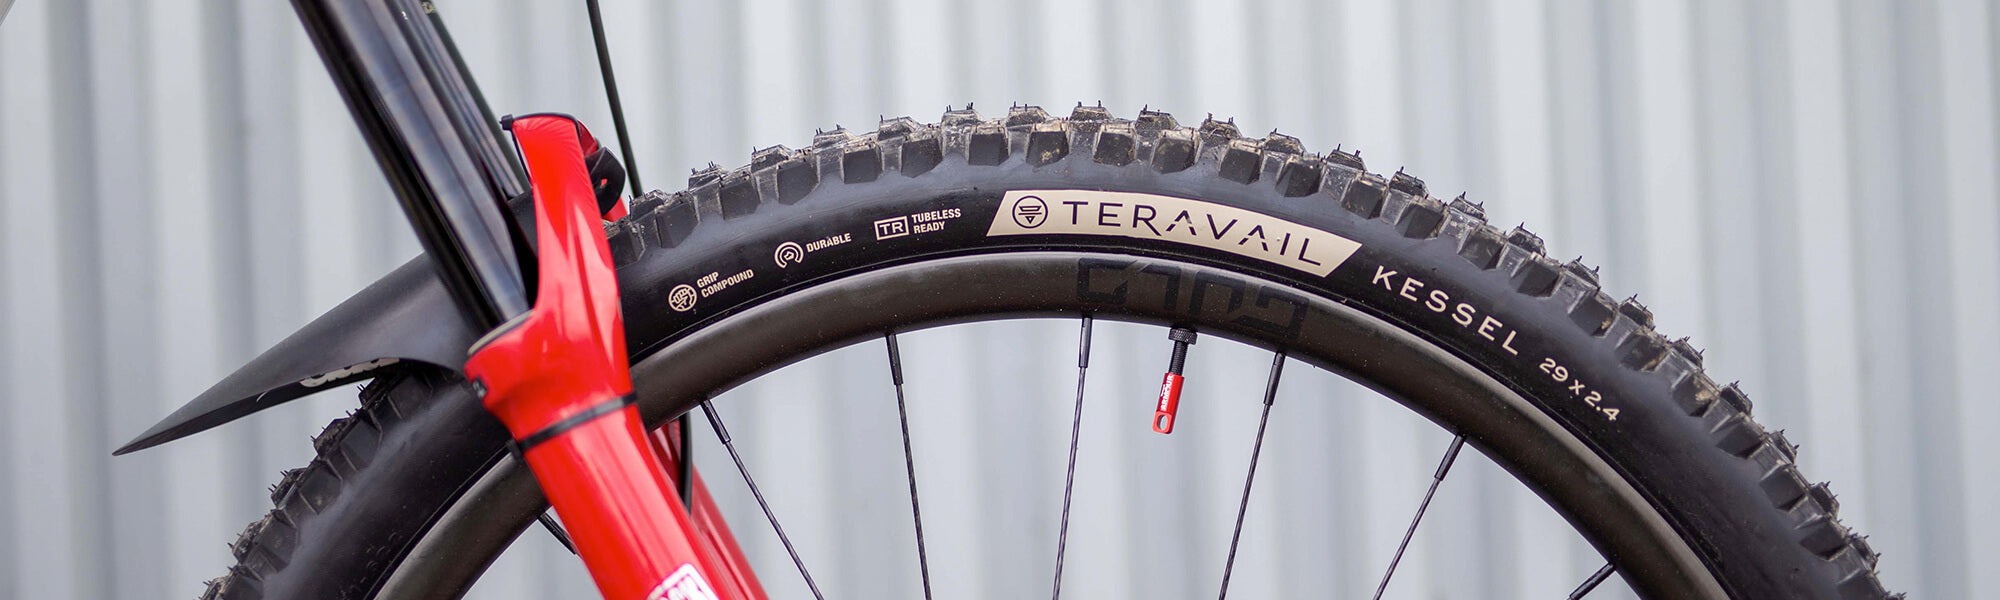 Closeup view of the front end of a bike with a Teravail tire mounted between the fork.